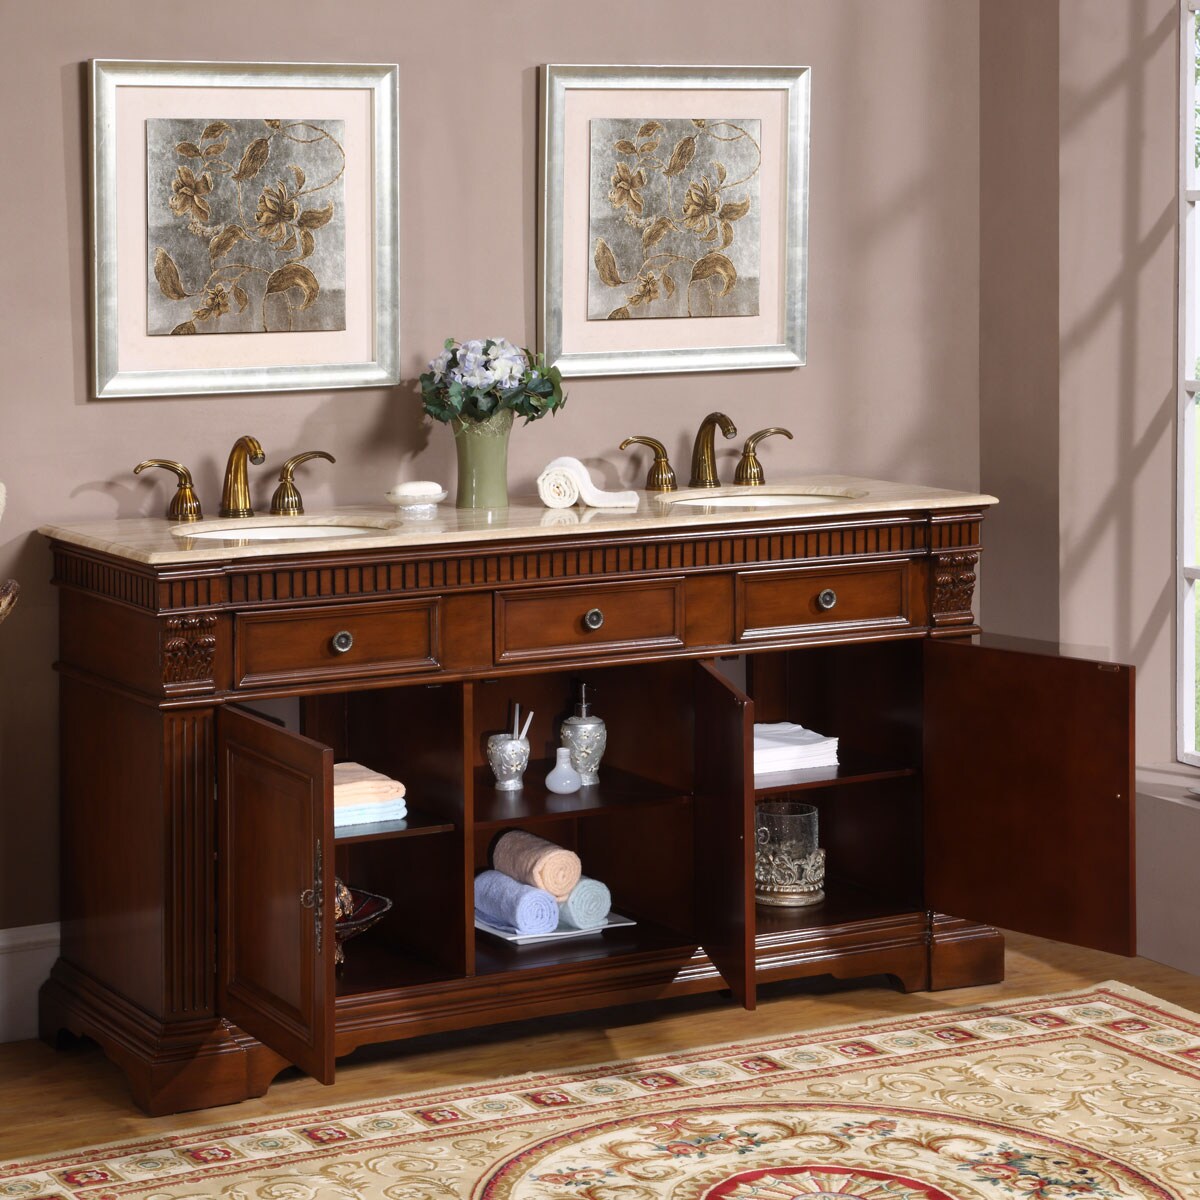 Silkroad Exclusive 67-In Cherry Undermount Double Sink Bathroom Vanity With  Travertine Top At Lowes.Com